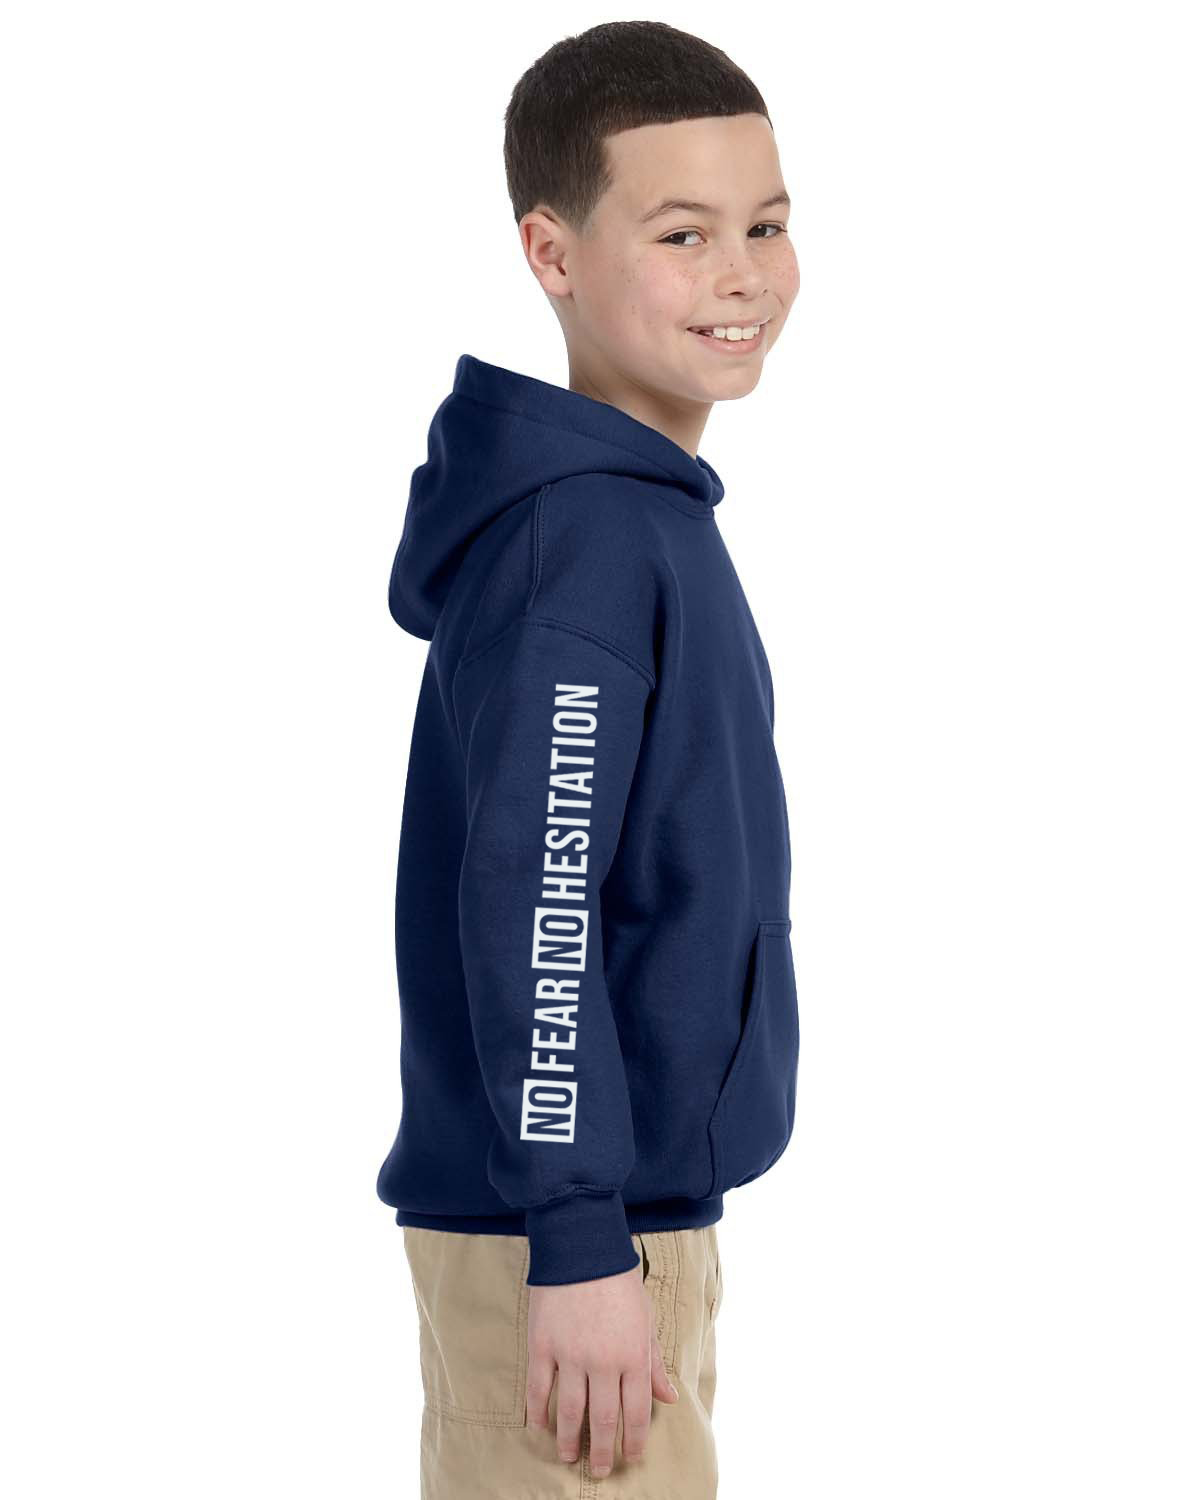 No Fear SVR Navy Hoodie Youth